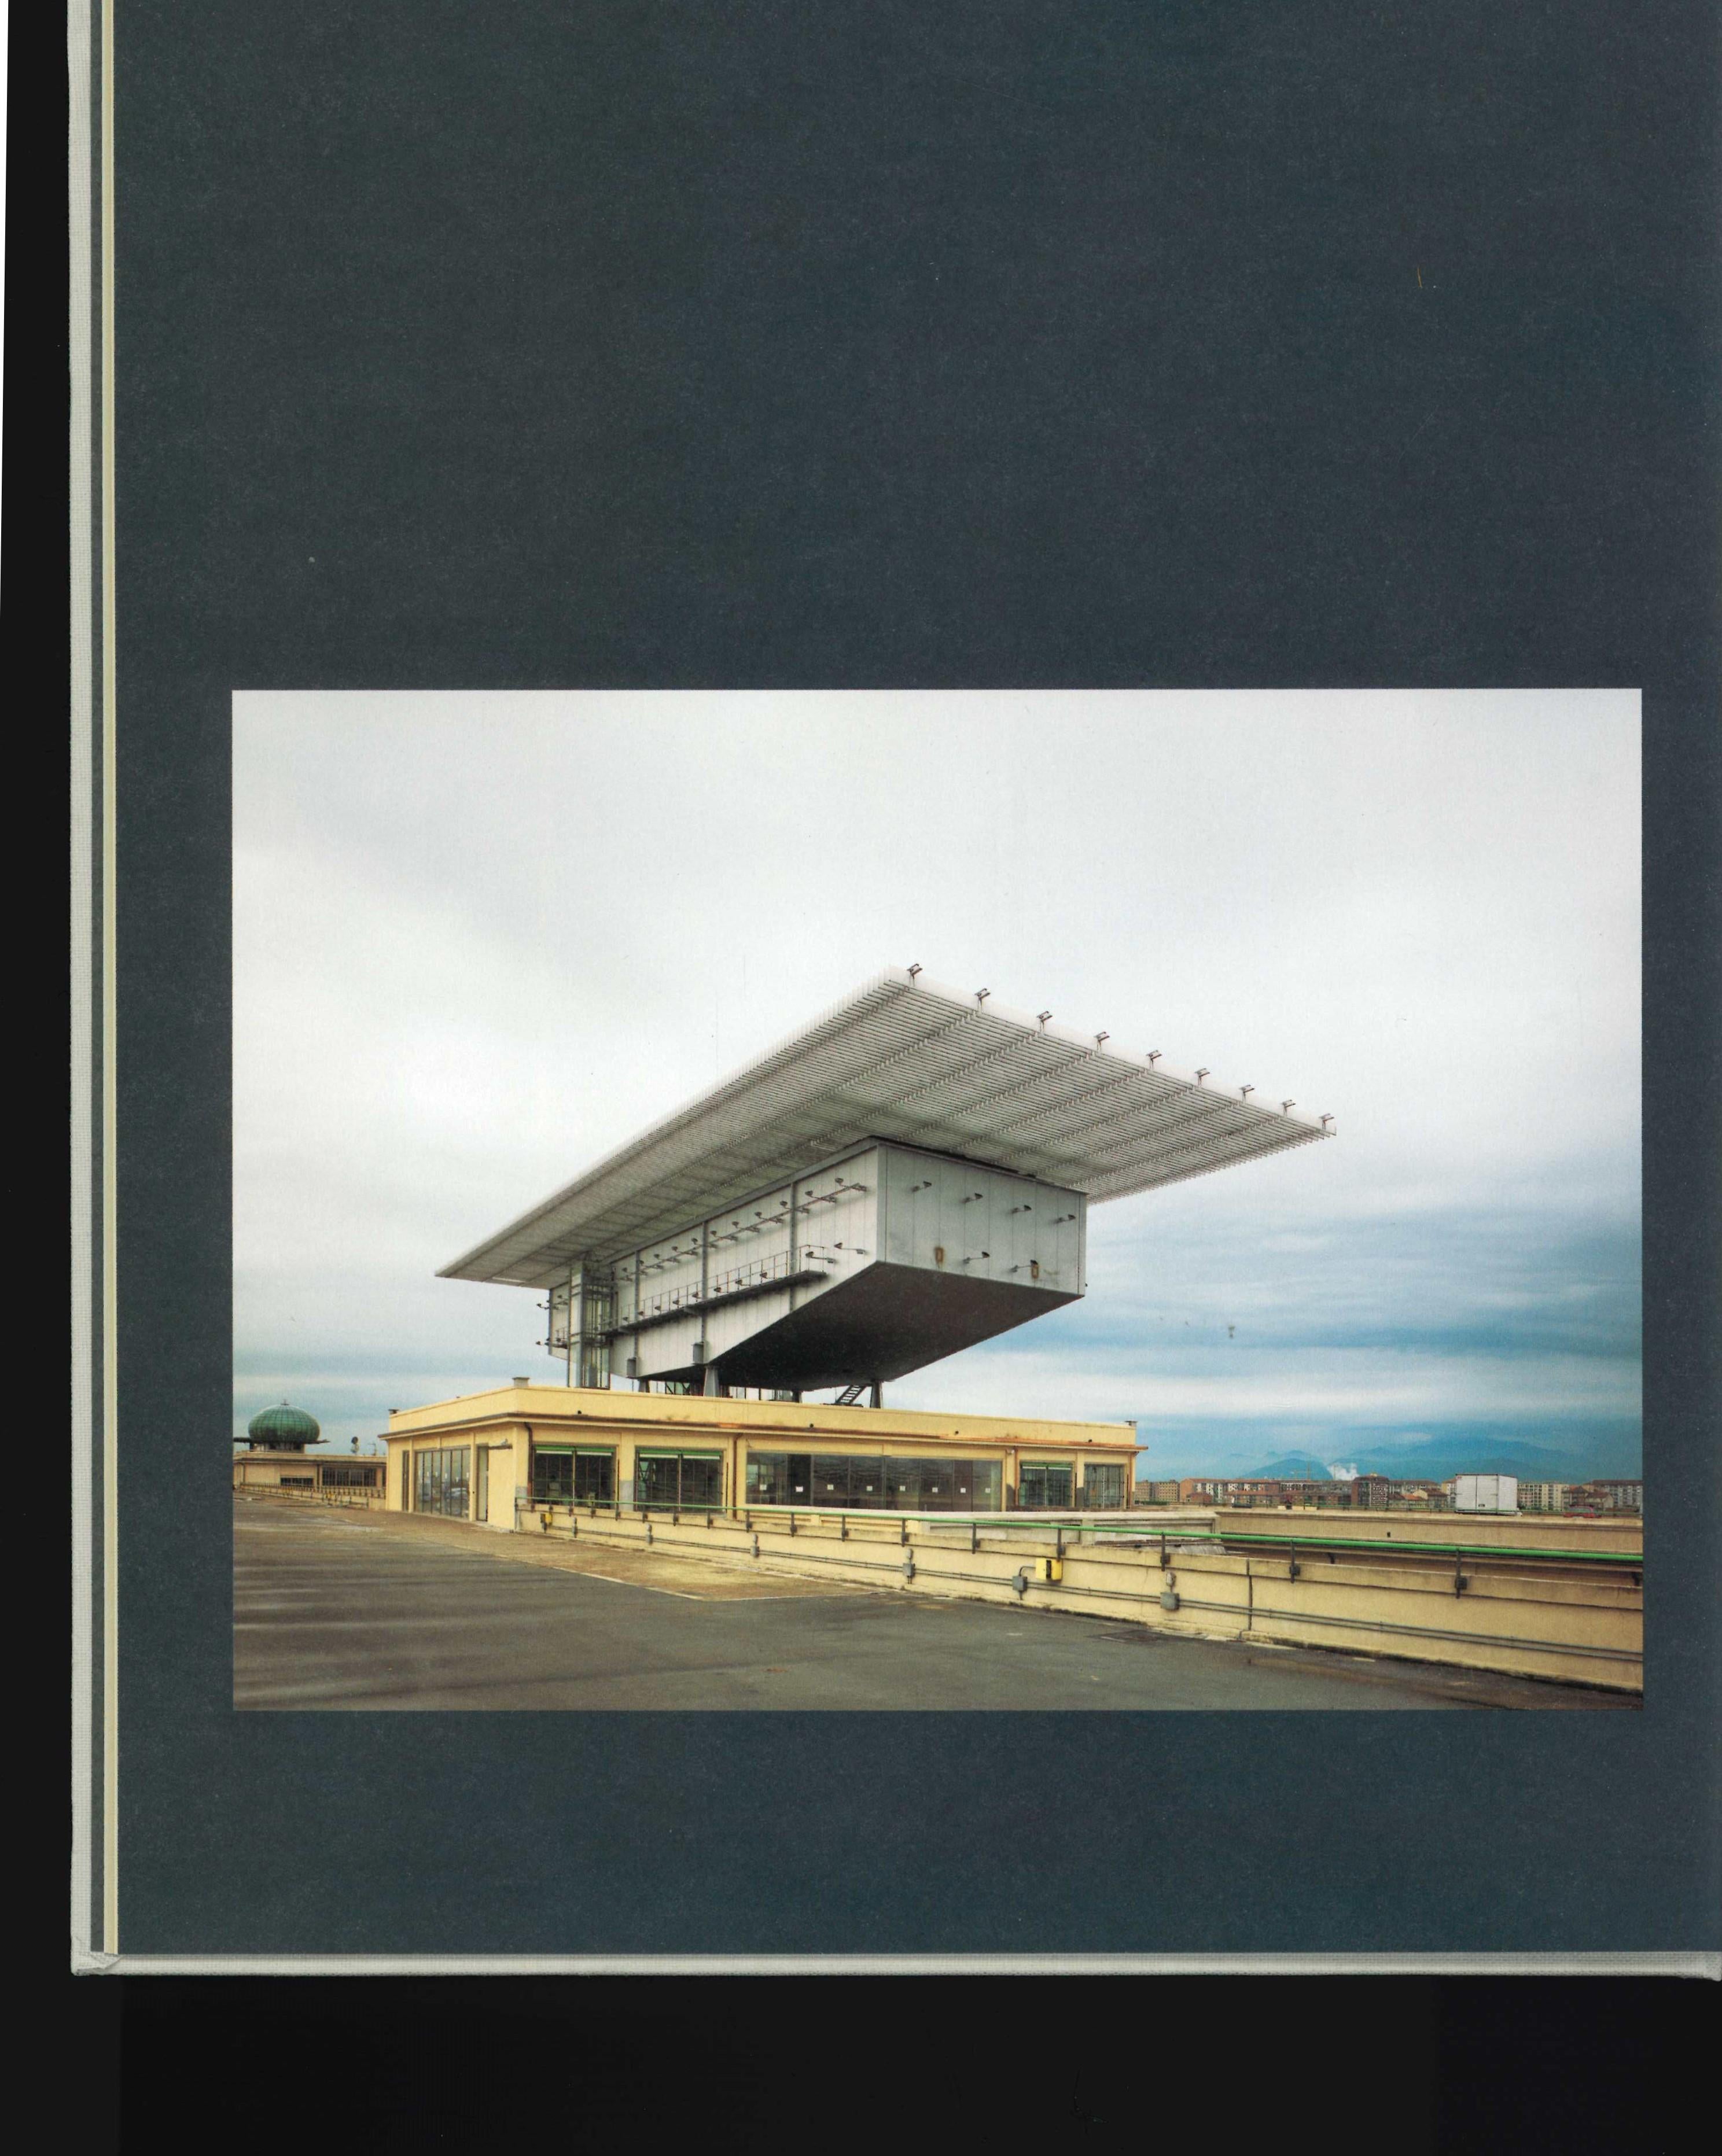 A Brand new Book. The esteemed collectors Laurence and Patrick Seguin first discovered the work of Jean Prouvé in the late 1980s, and were quick to embrace his entire aesthetic vision, from architectural design to furniture. There is no difference